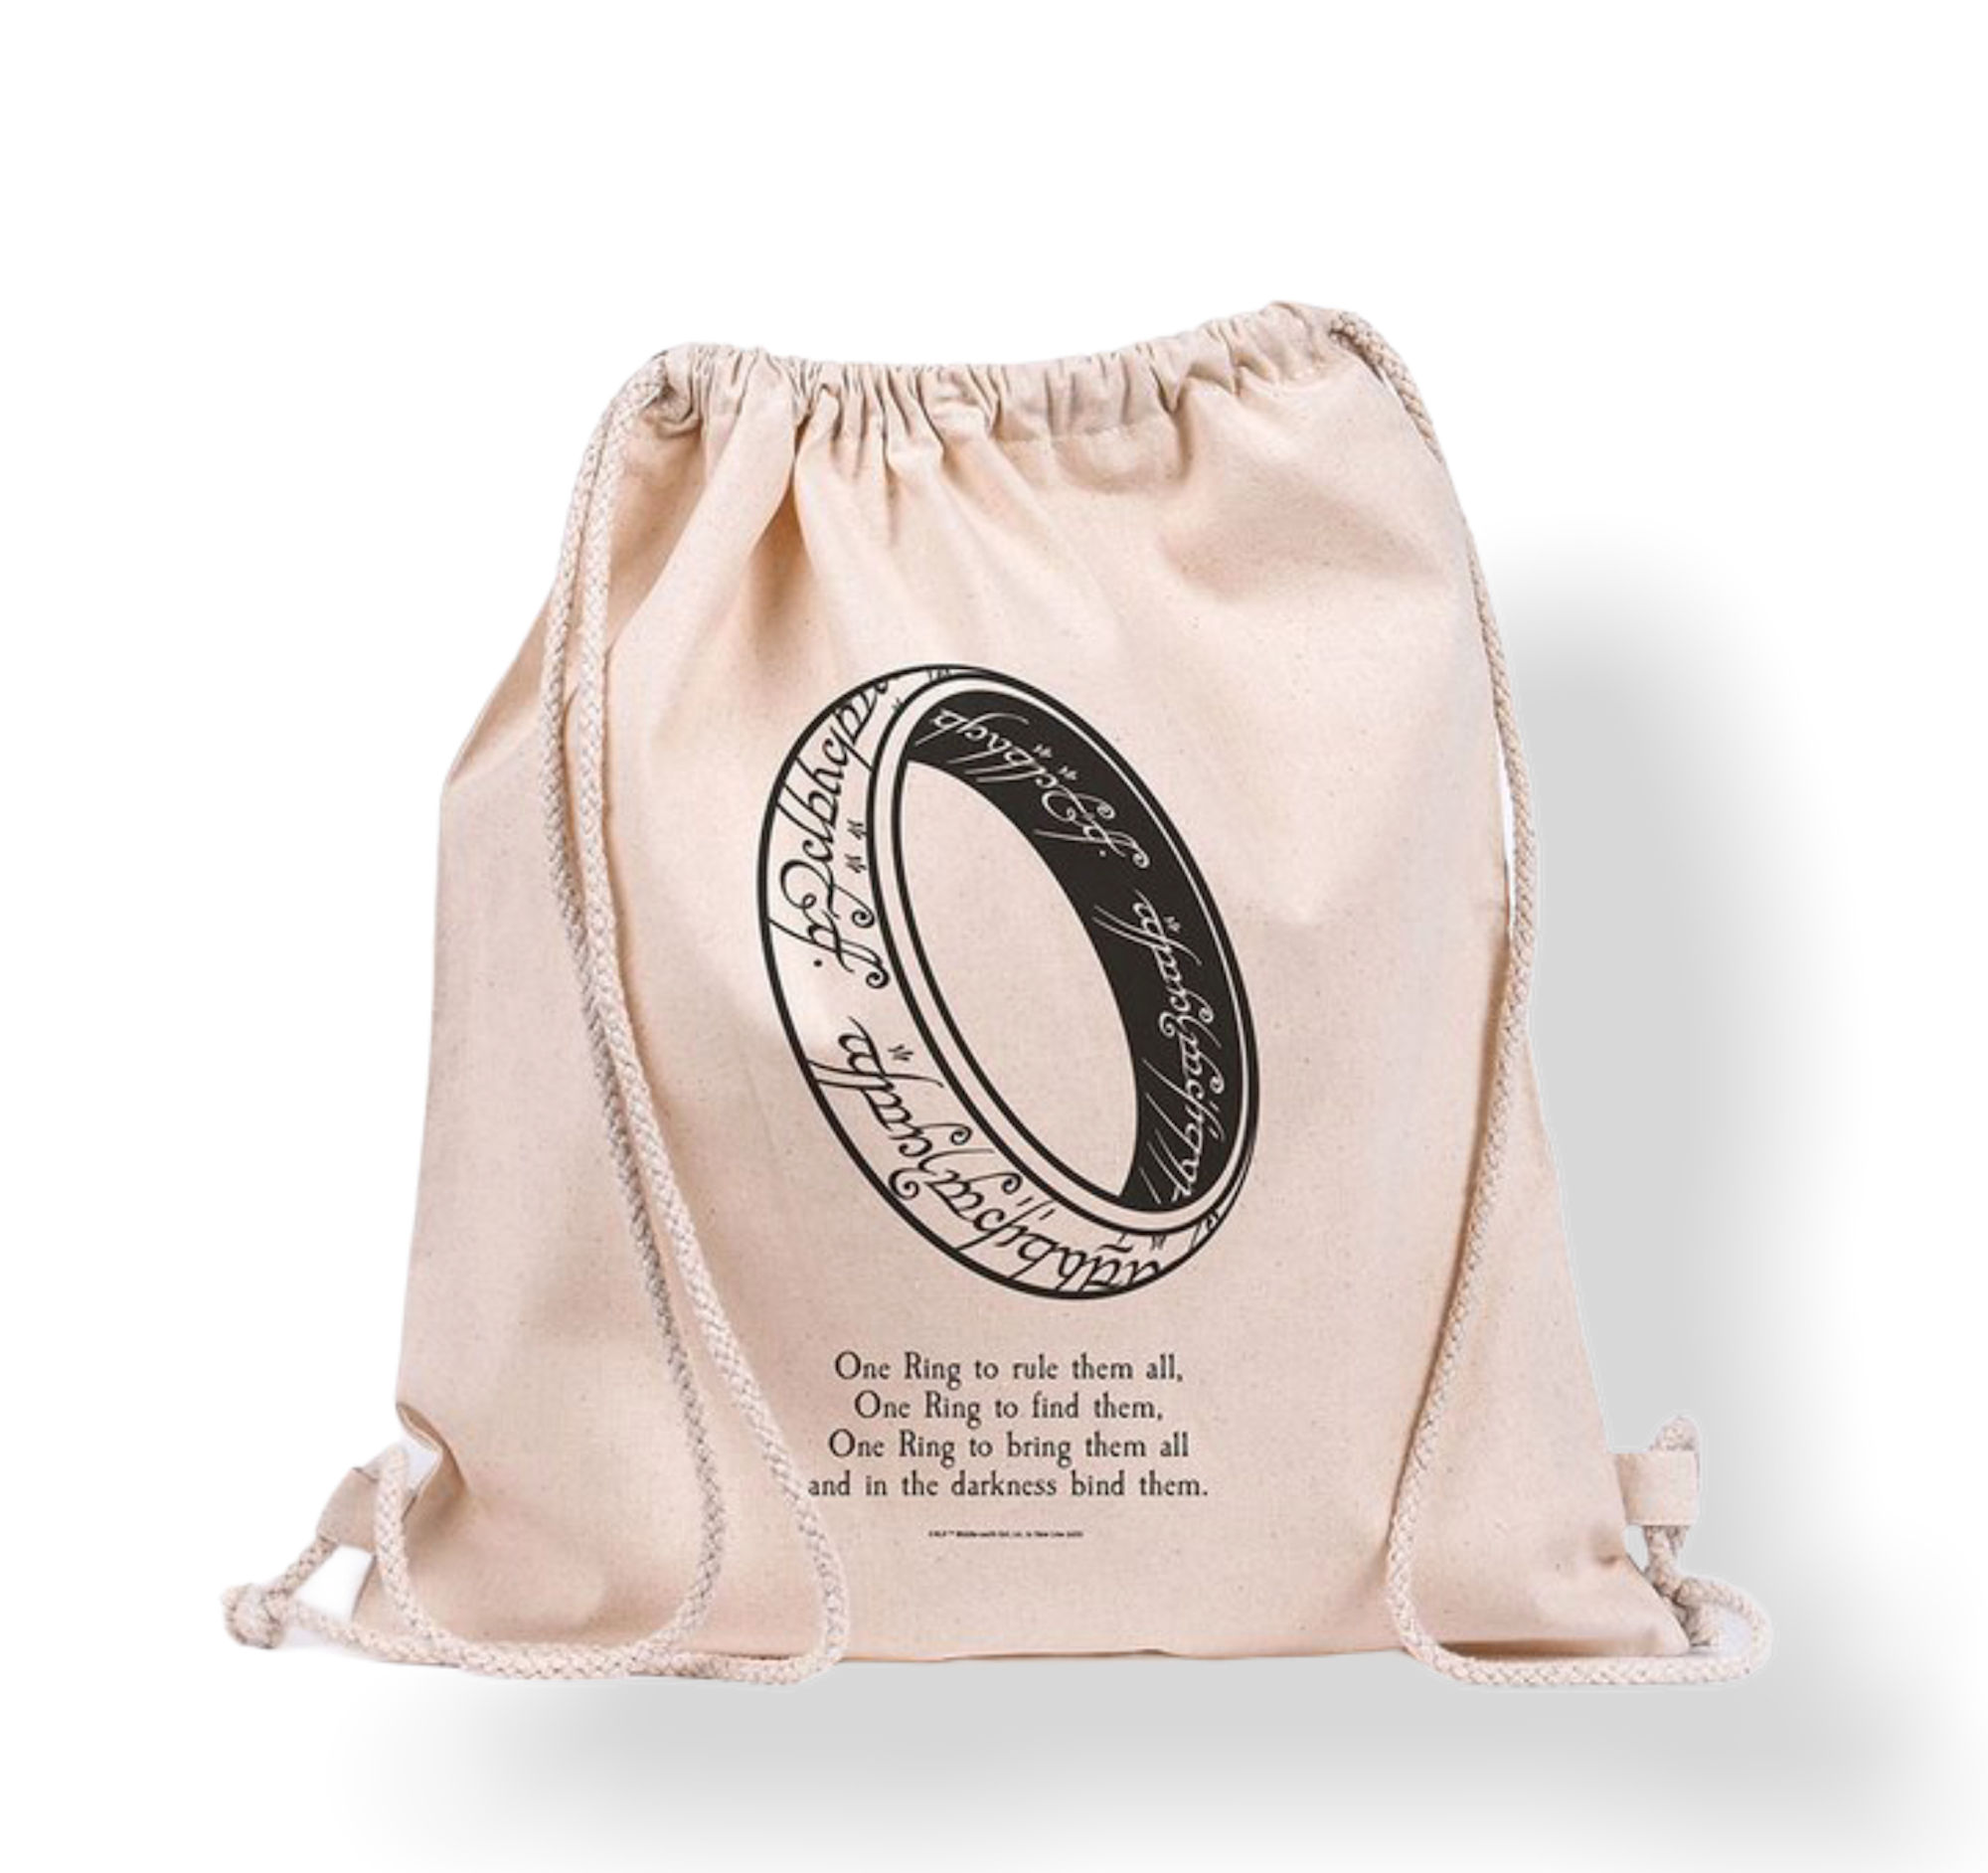 LORD OF THE RINGS - One Ring - Sac en toile 100% coton 42x37cm